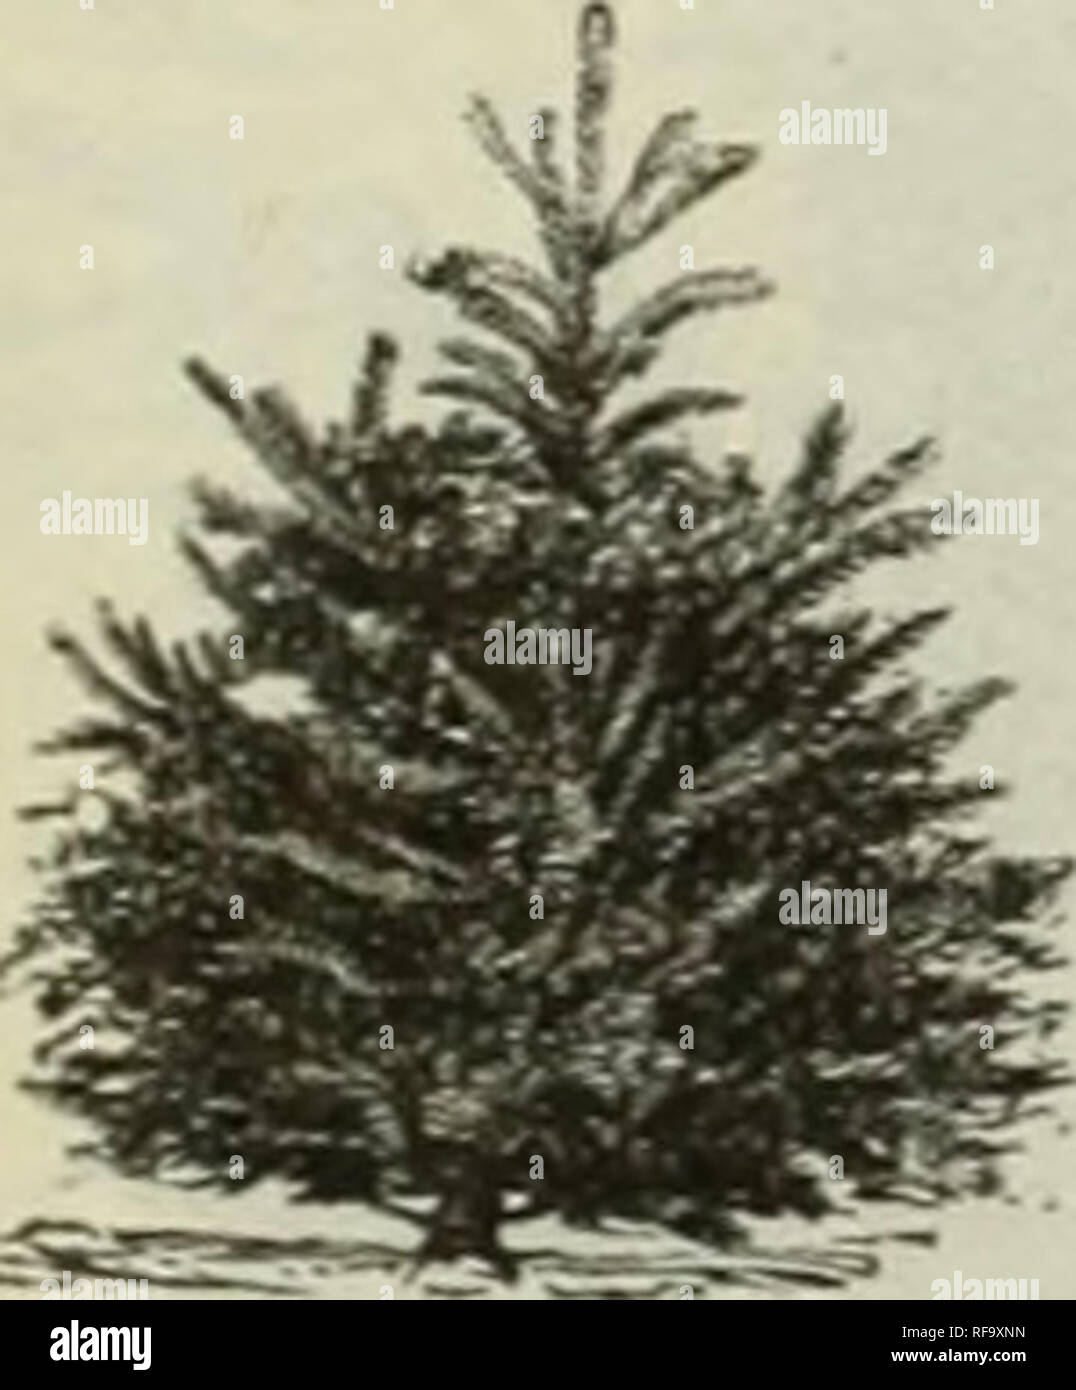 . Catalogue of hardy ornamental trees, shrubs, and vines, hardy flowers and large and small fruits. Nurseries (Horticulture) Massachusetts Catalogs; Plants, Ornamental Catalogs; Trees Seedlings Catalogs; Ornamental shrubs Catalogs; Flowers Catalogs; Fruit Catalogs. Norway Spruce. 3 feet hiu'h. P. Cilicica. [Ciliciau Silver Fir. ] See under Abies. P. concolor. [White Fir.] Set UndefirAbies. P Douglassi. [Douglass Spruce.] See under Psaidatsnga. P. Englemanii. [Fugleman's Spruce.] Lg. A tall tree at maturity, of dense pyramidal growth. Foliage stiff and often taking on very pleasing shades of gl Stock Photo